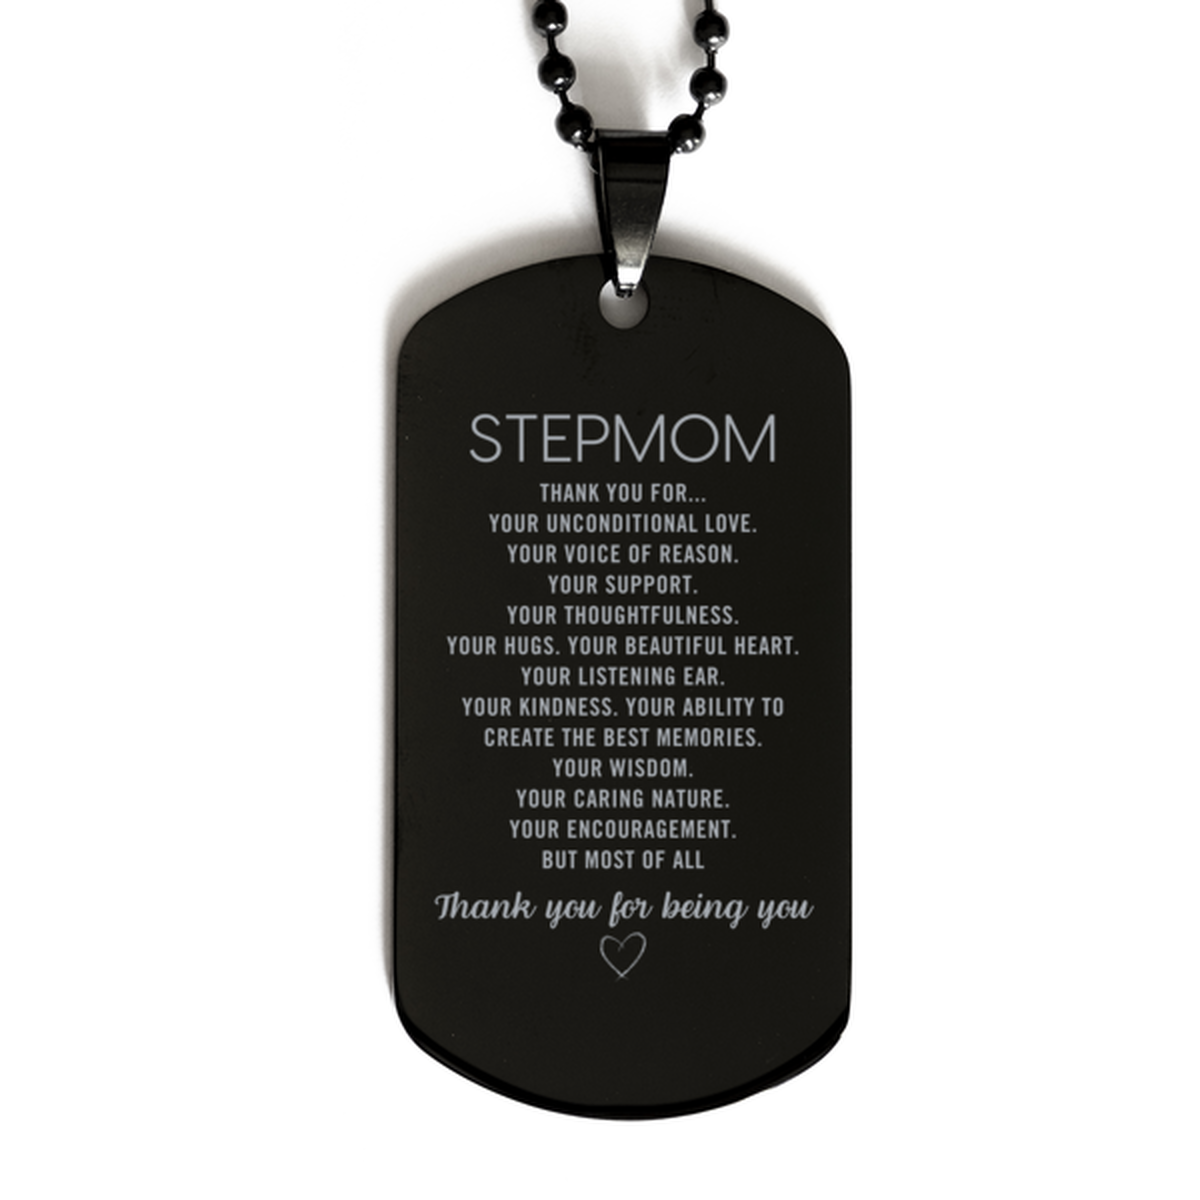 Stepmom Black Dog Tag Custom, Engraved Gifts For Stepmom Christmas Graduation Birthday Gifts for Men Women Stepmom Thank you for Your unconditional love